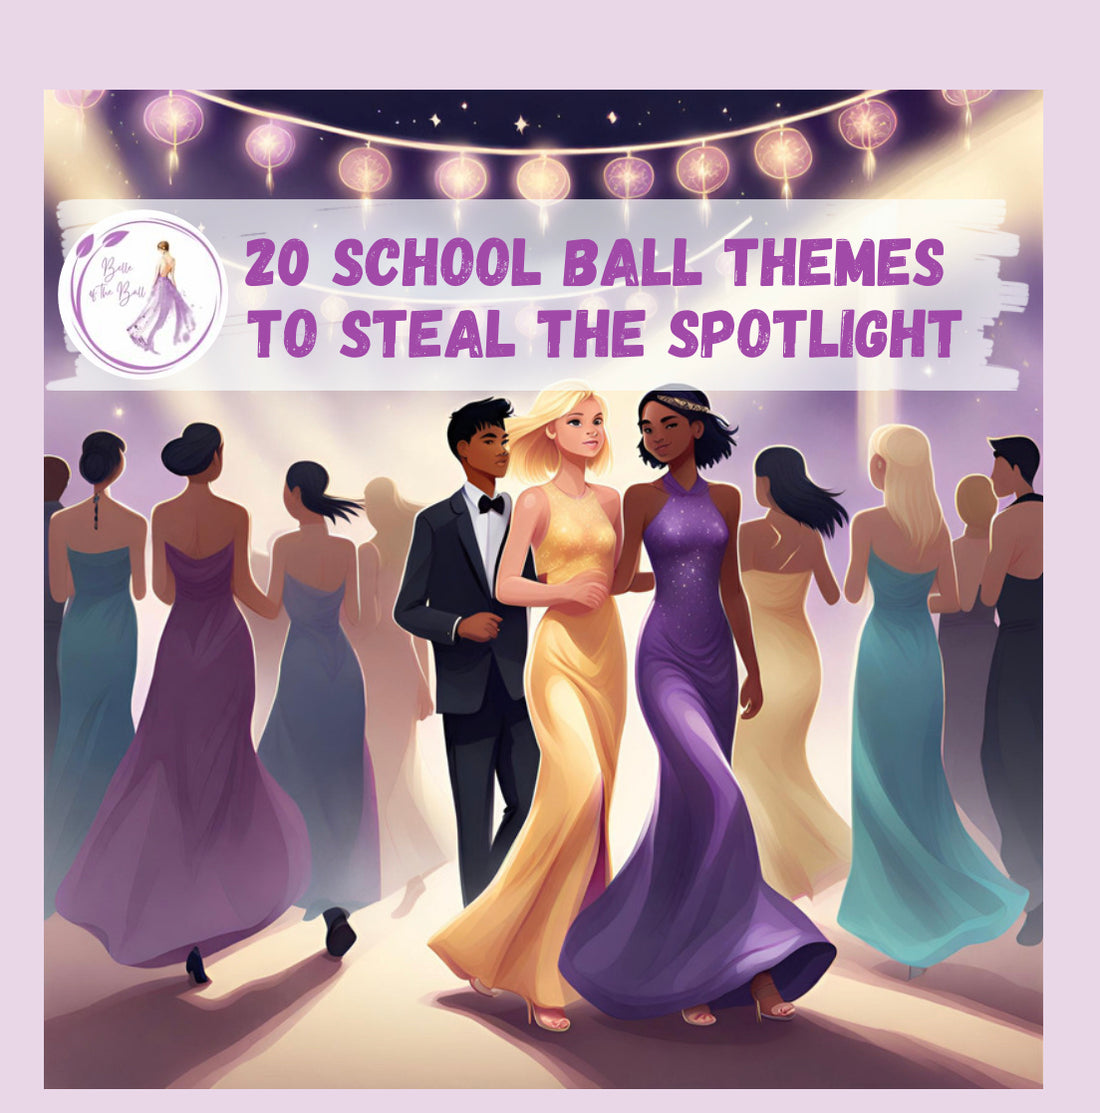 20 School Ball Themes to Steal the Spotlight